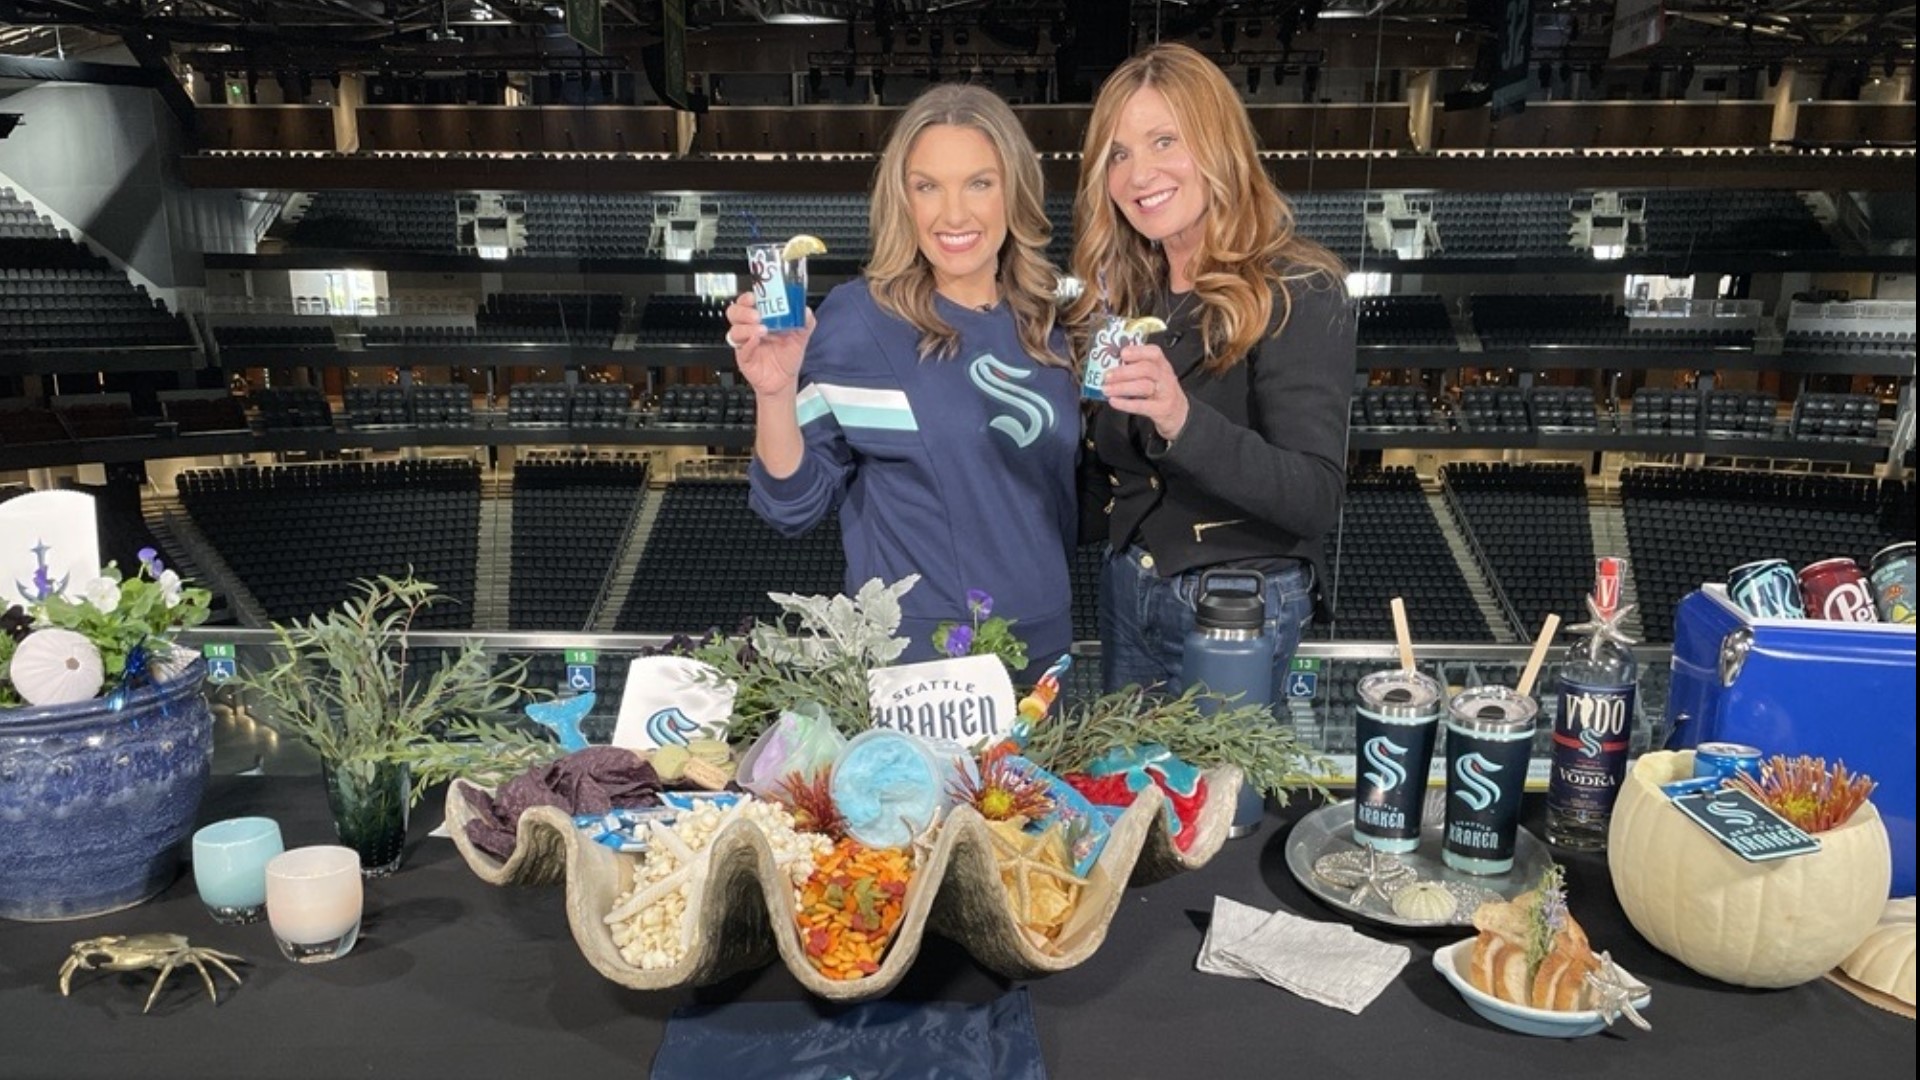 425 Magazine Contributor Monica Hart joined us to share her tips for a fun under-the-sea-themed Kraken tailgate party! #newdaynw